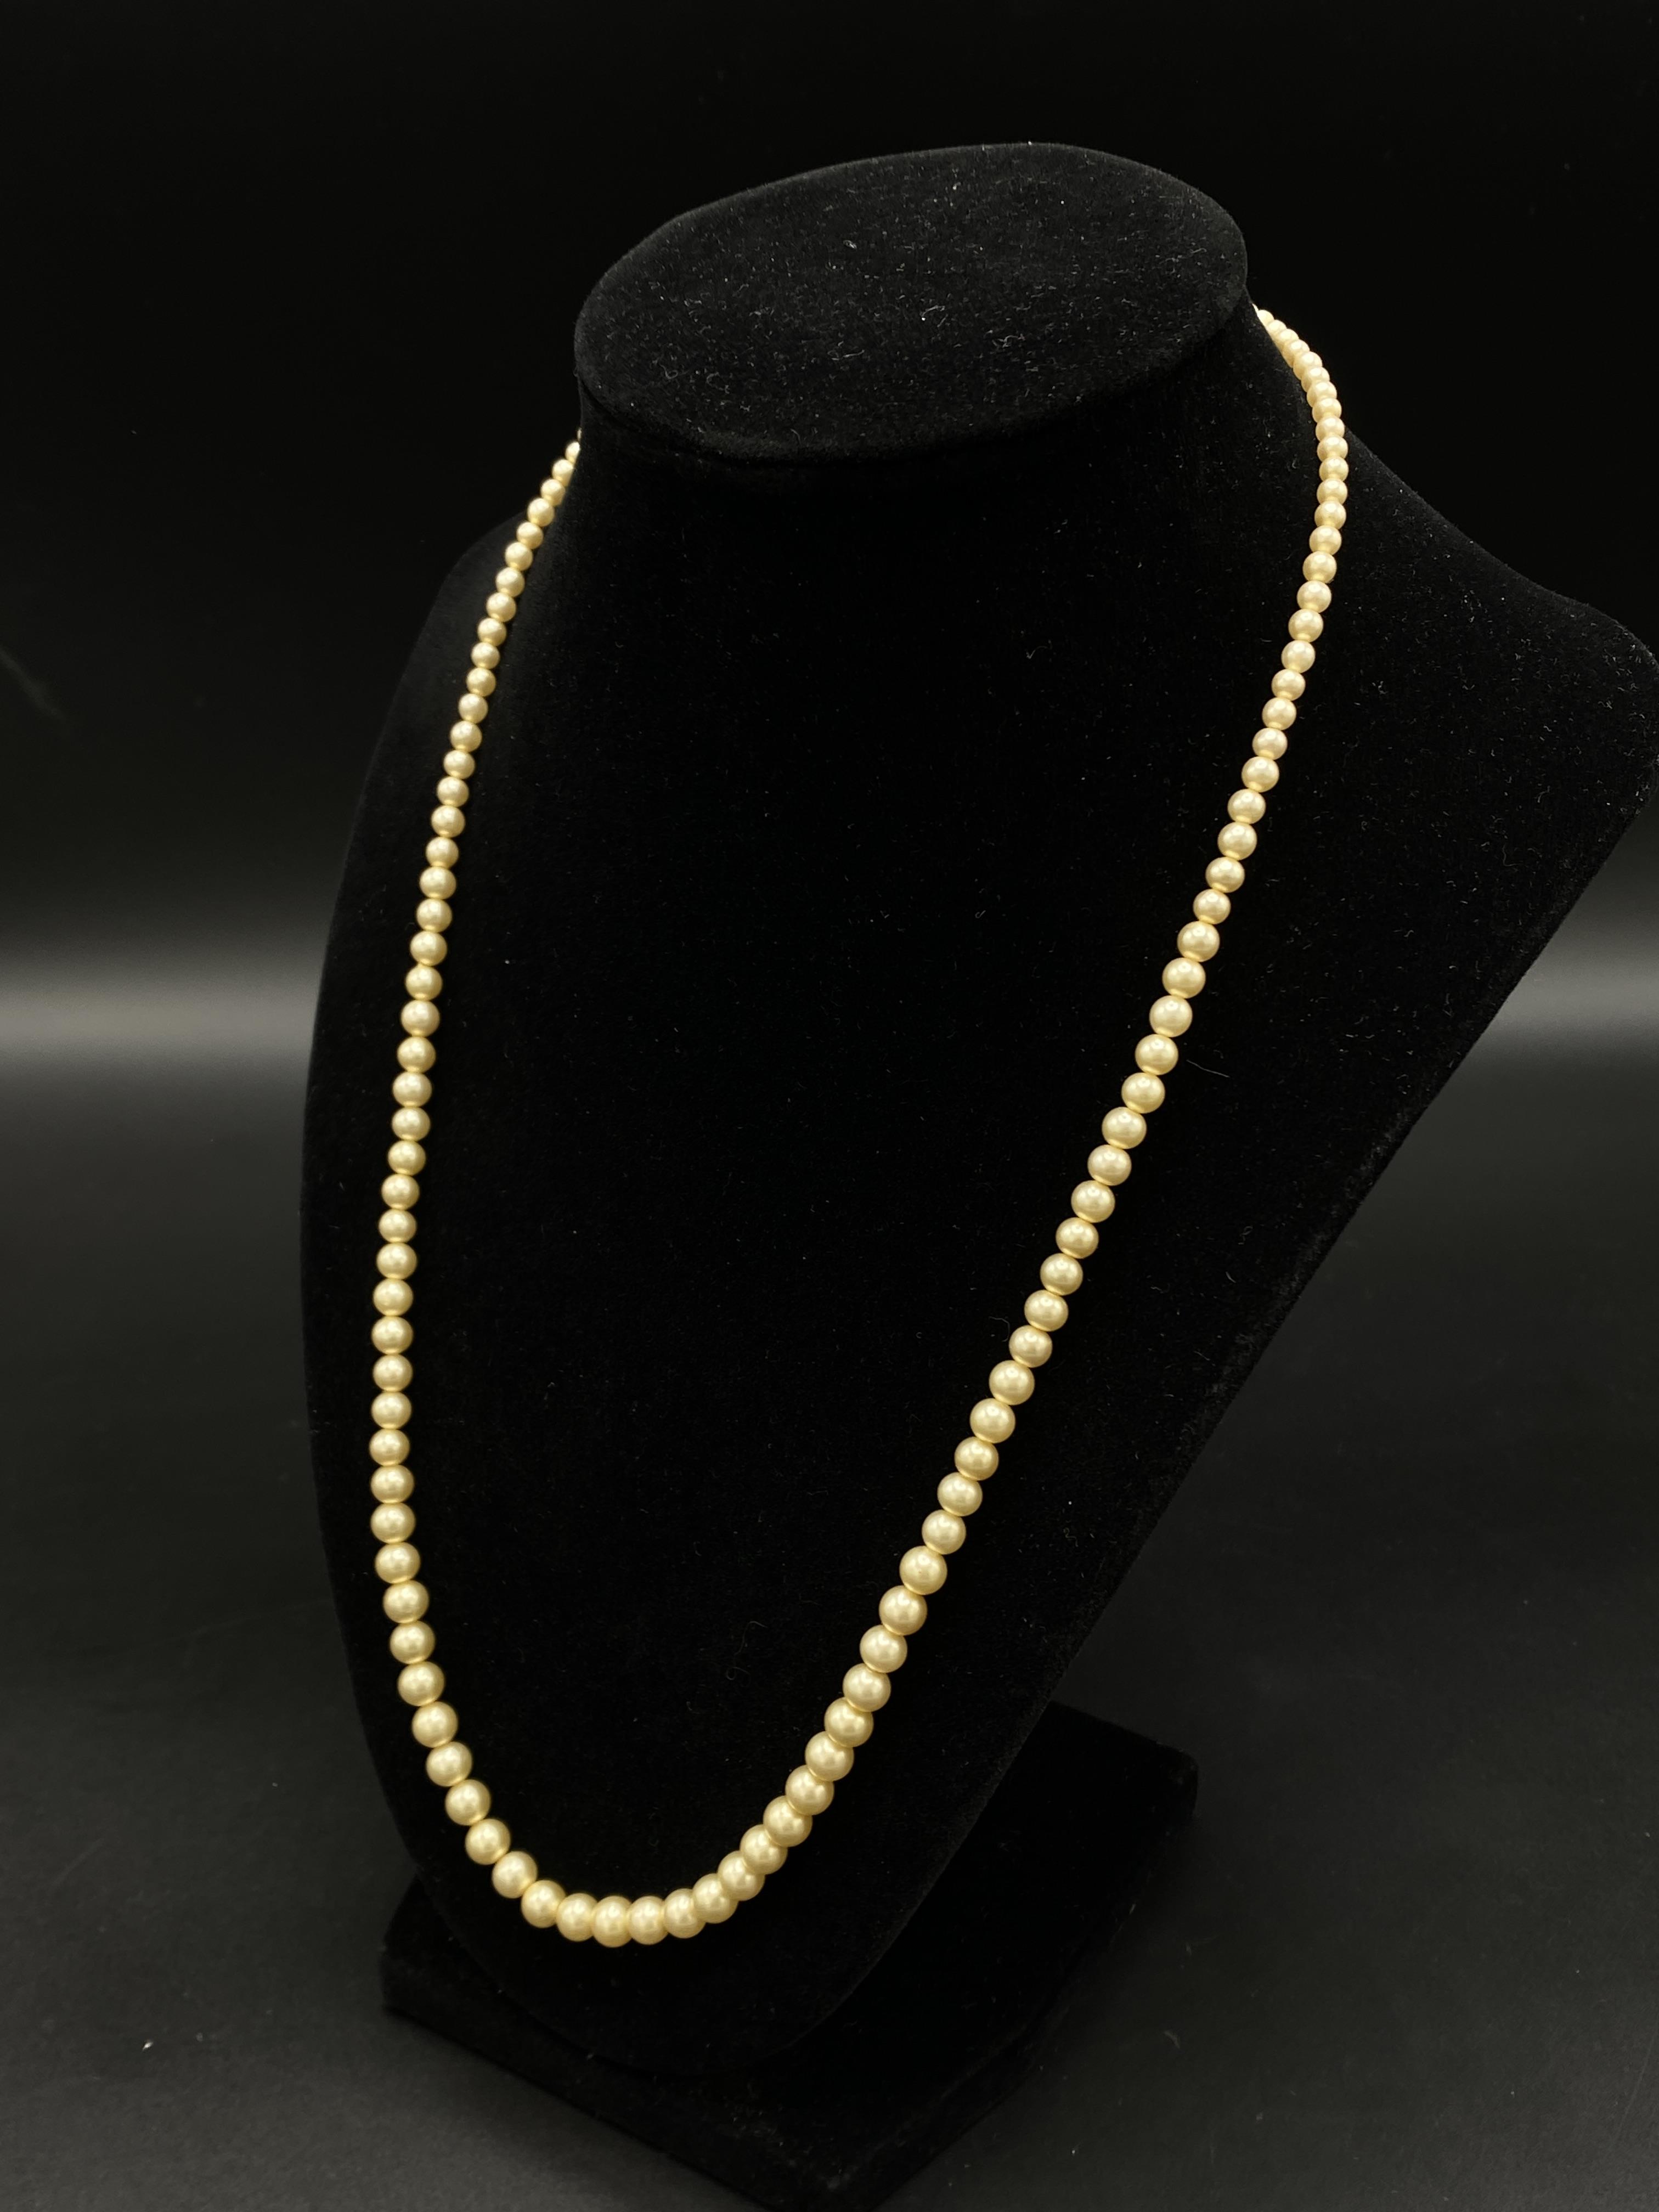 Two pearl necklaces with gold clasps - Image 2 of 9